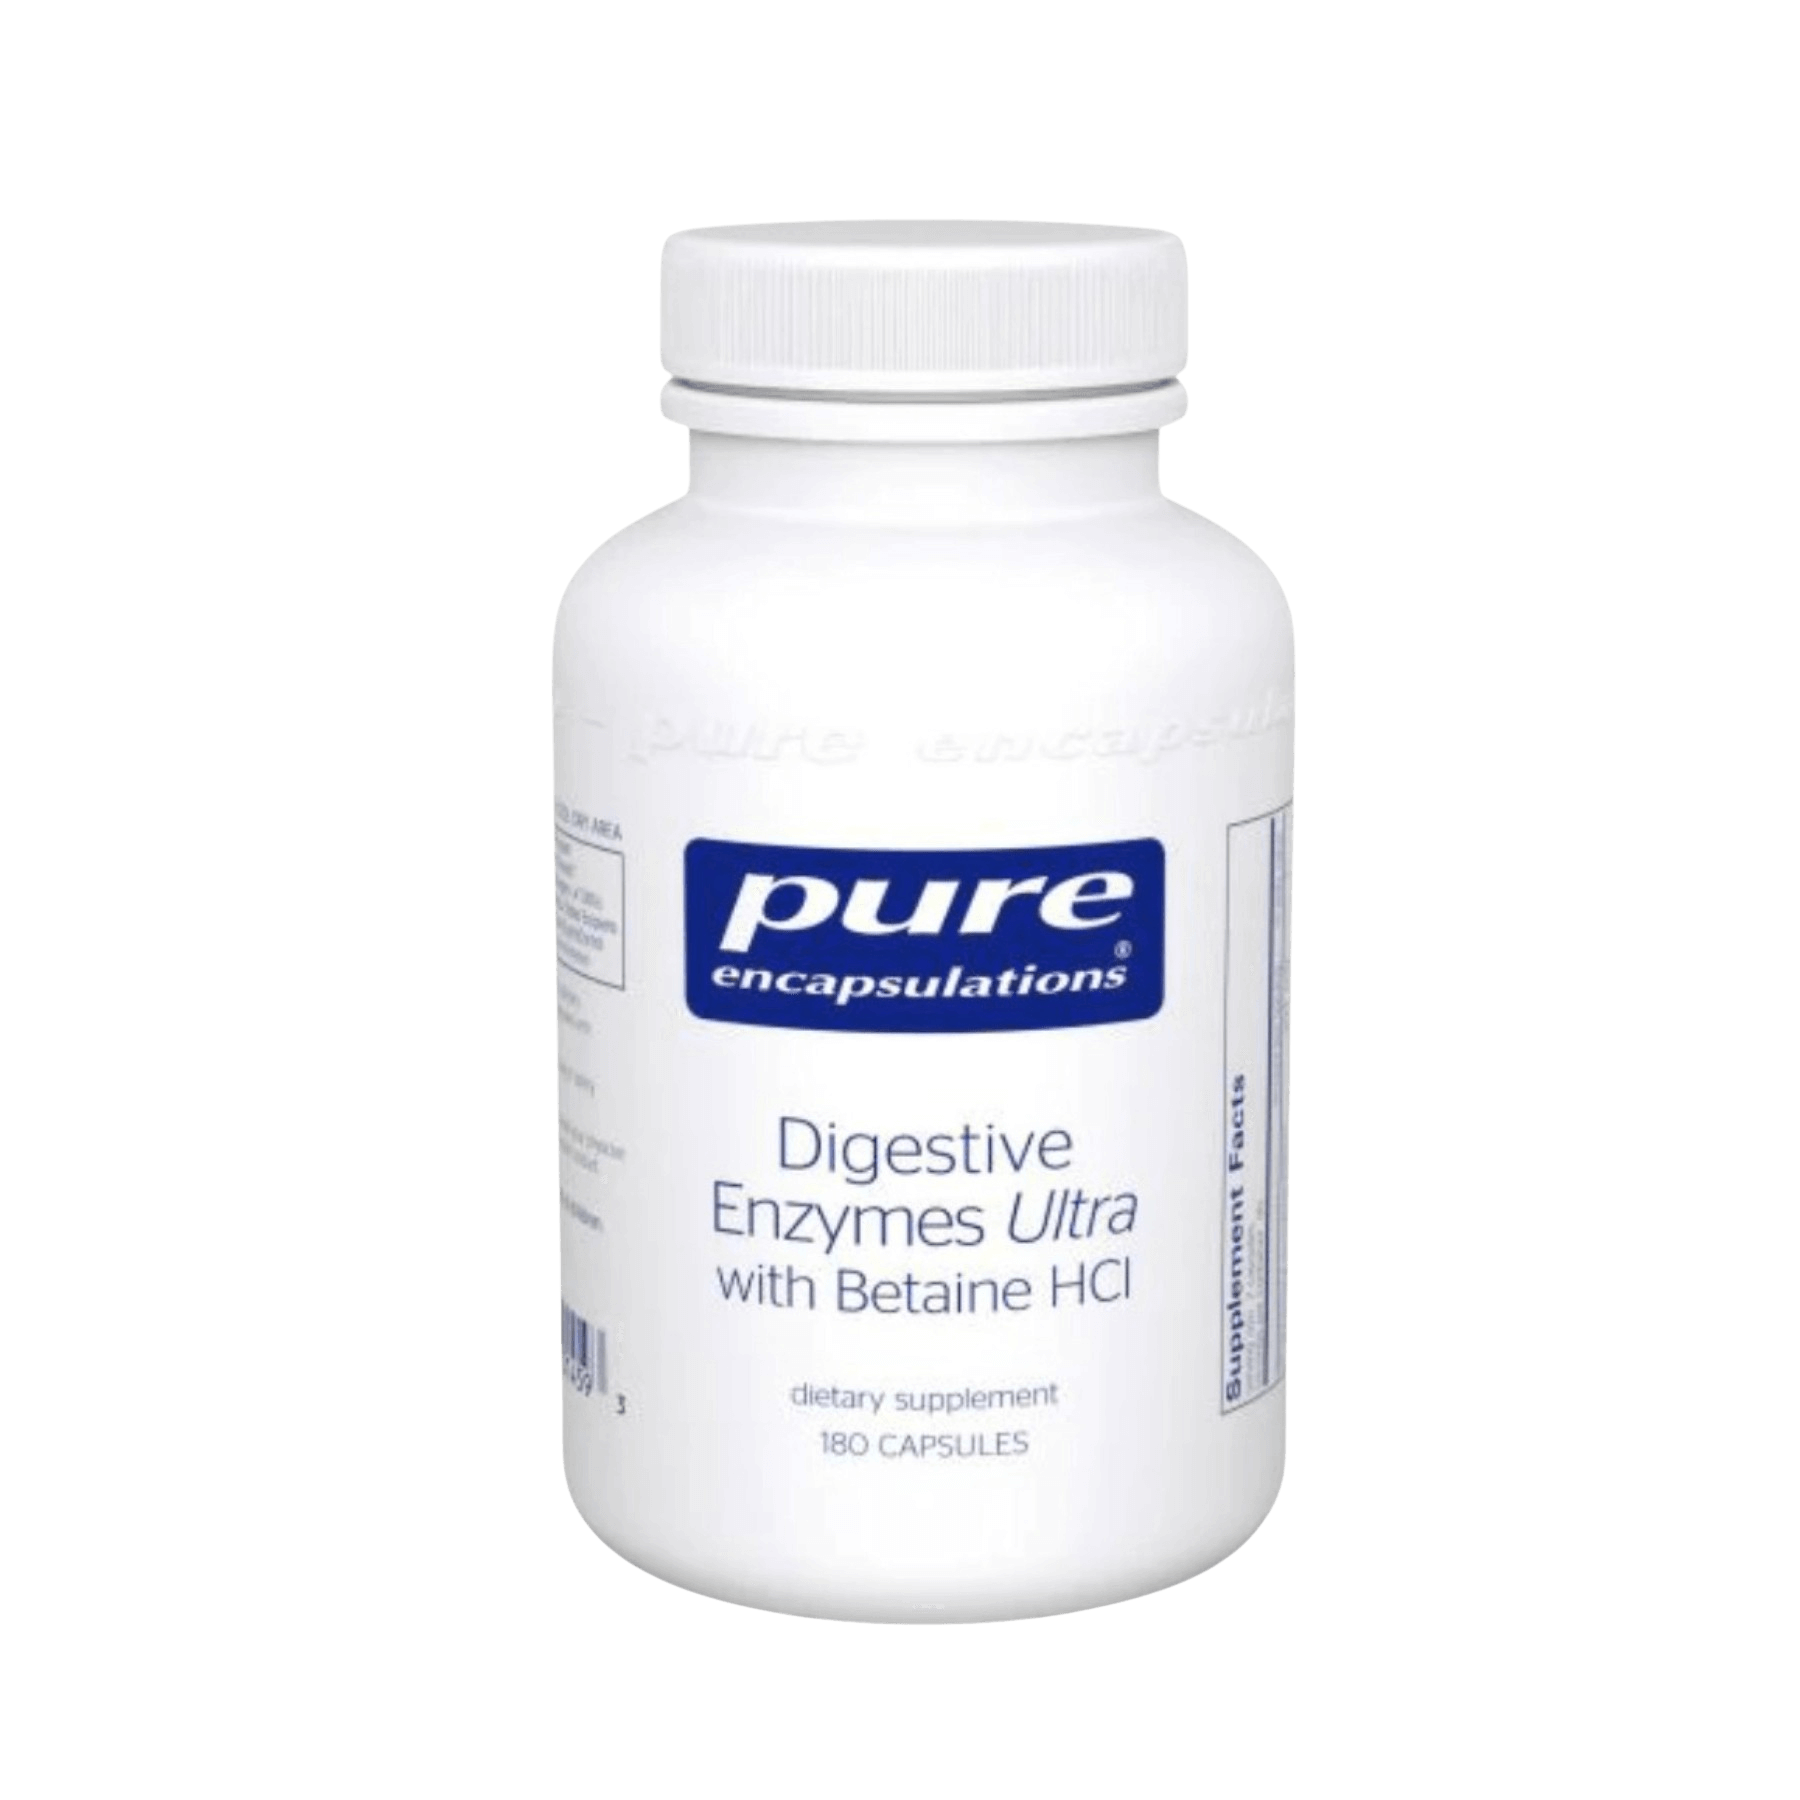 Pure Encapsulations Digestive Enzymes with betaine HCL capsules